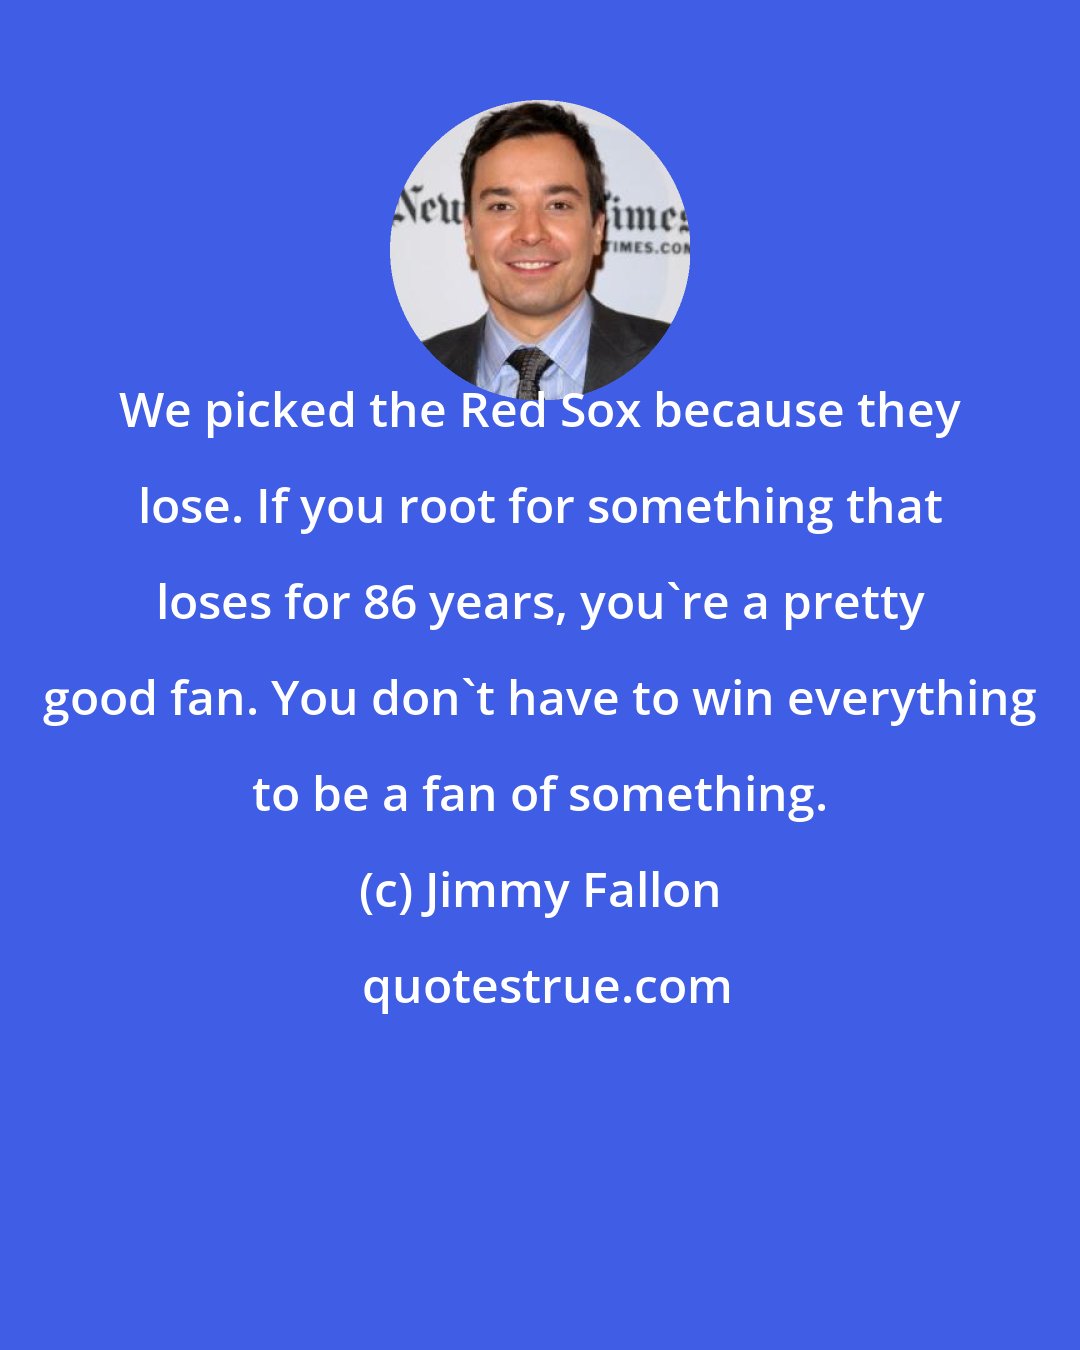 Jimmy Fallon: We picked the Red Sox because they lose. If you root for something that loses for 86 years, you're a pretty good fan. You don't have to win everything to be a fan of something.